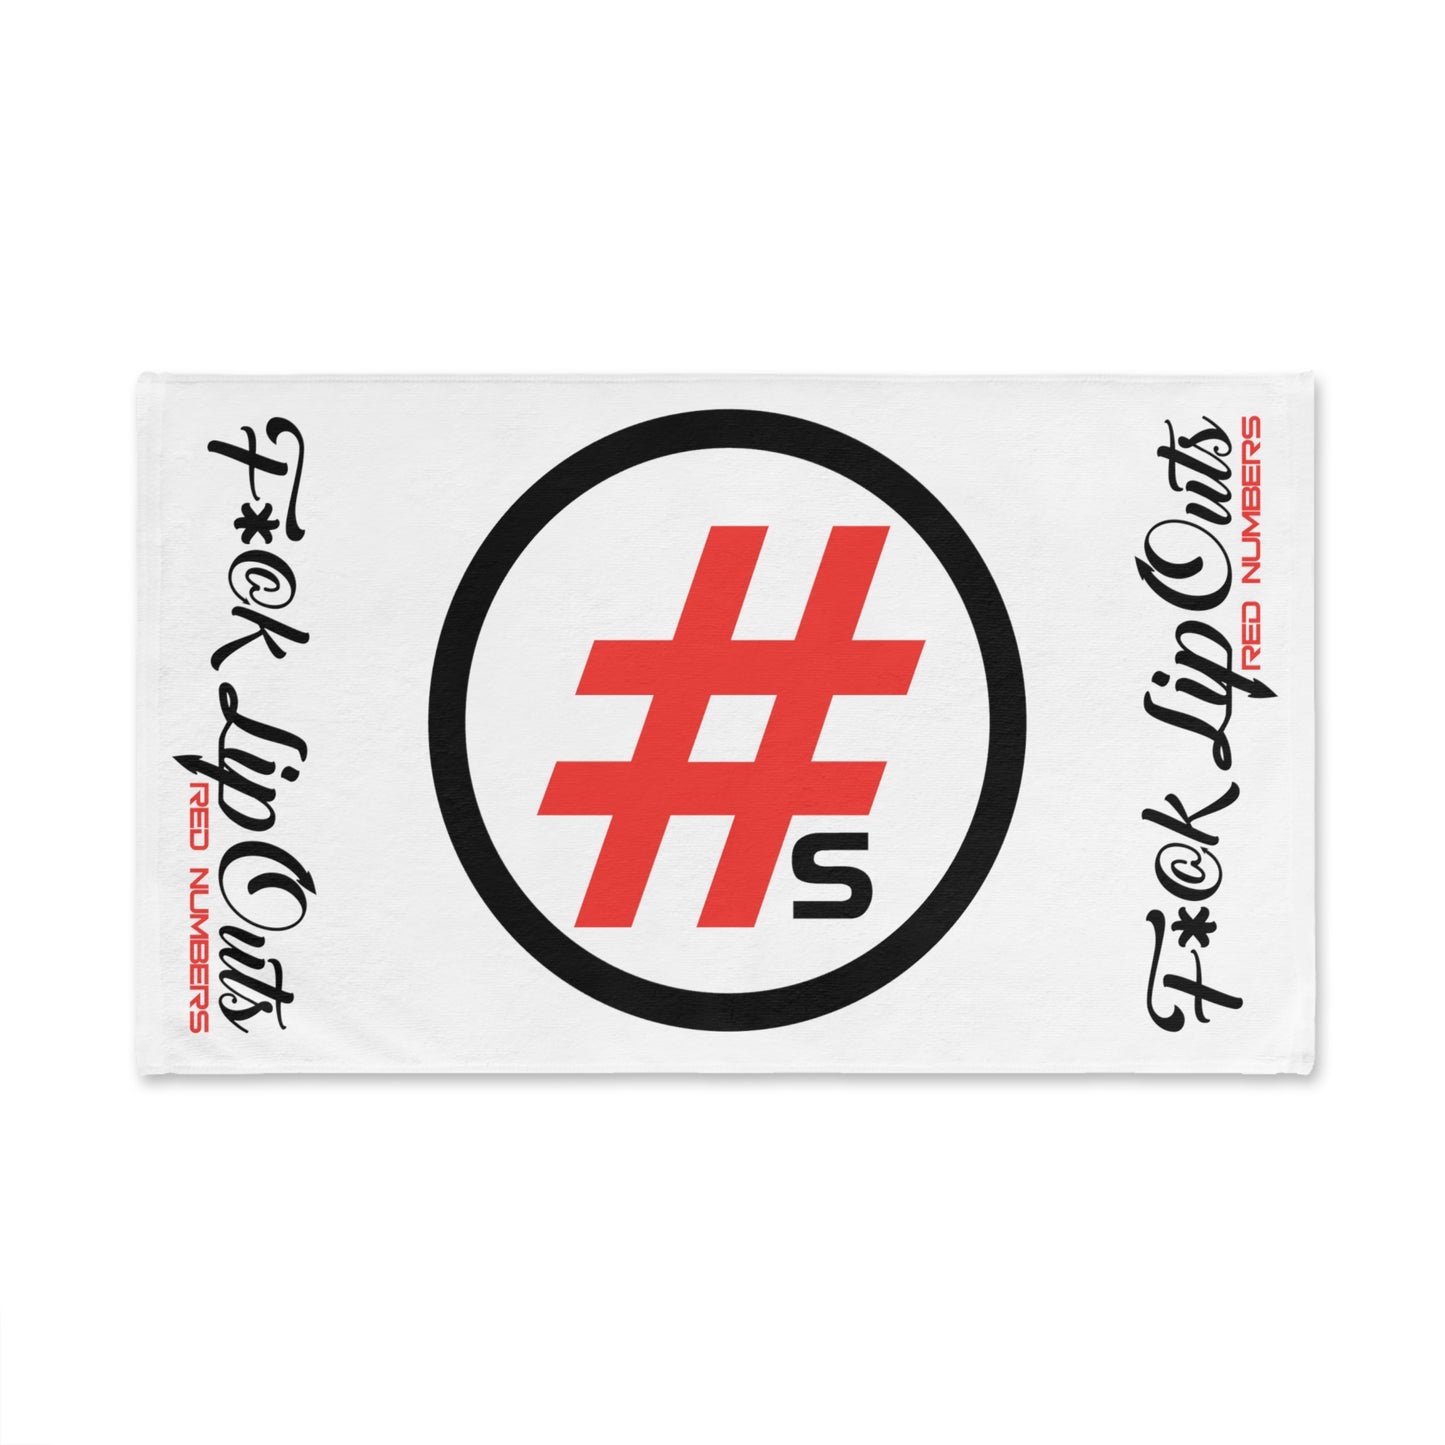 Red Numbers - F*@k Lip Outs Golf Towel (White)